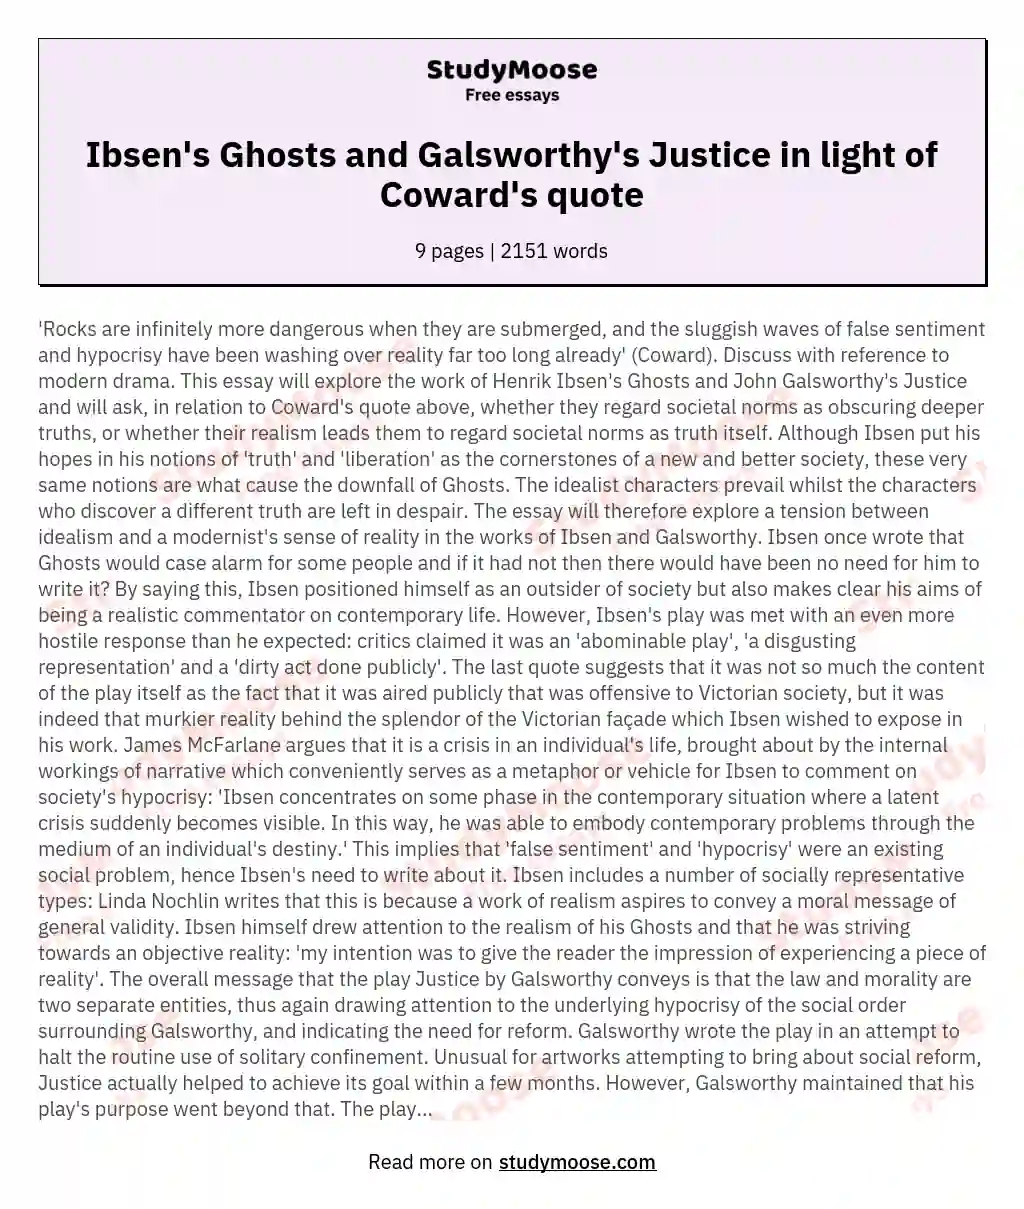 Henrik Ibsen's Ghosts and John Galsworthy's Justice in Relation to a Quote by Coward